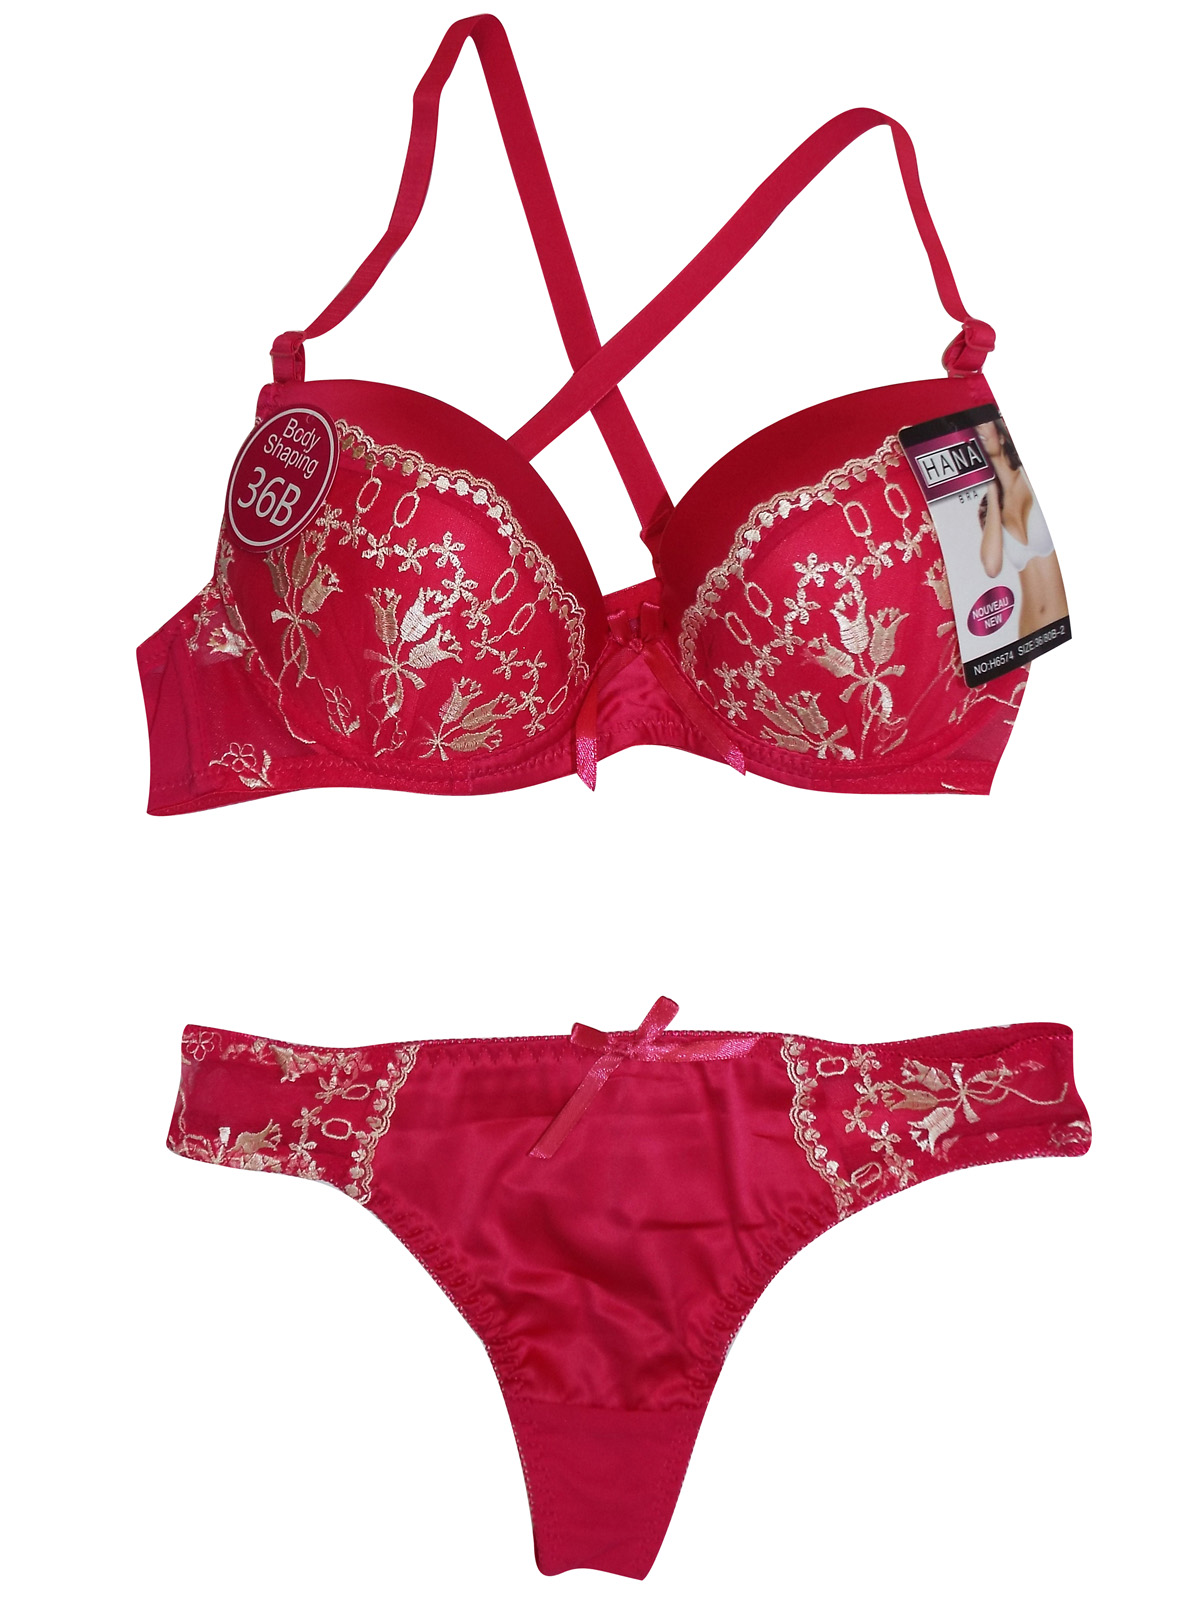 Hana Hana Hot Pink Embroidered Full Cup Satin And Mesh Bra And Thong Set Size 36 To 46